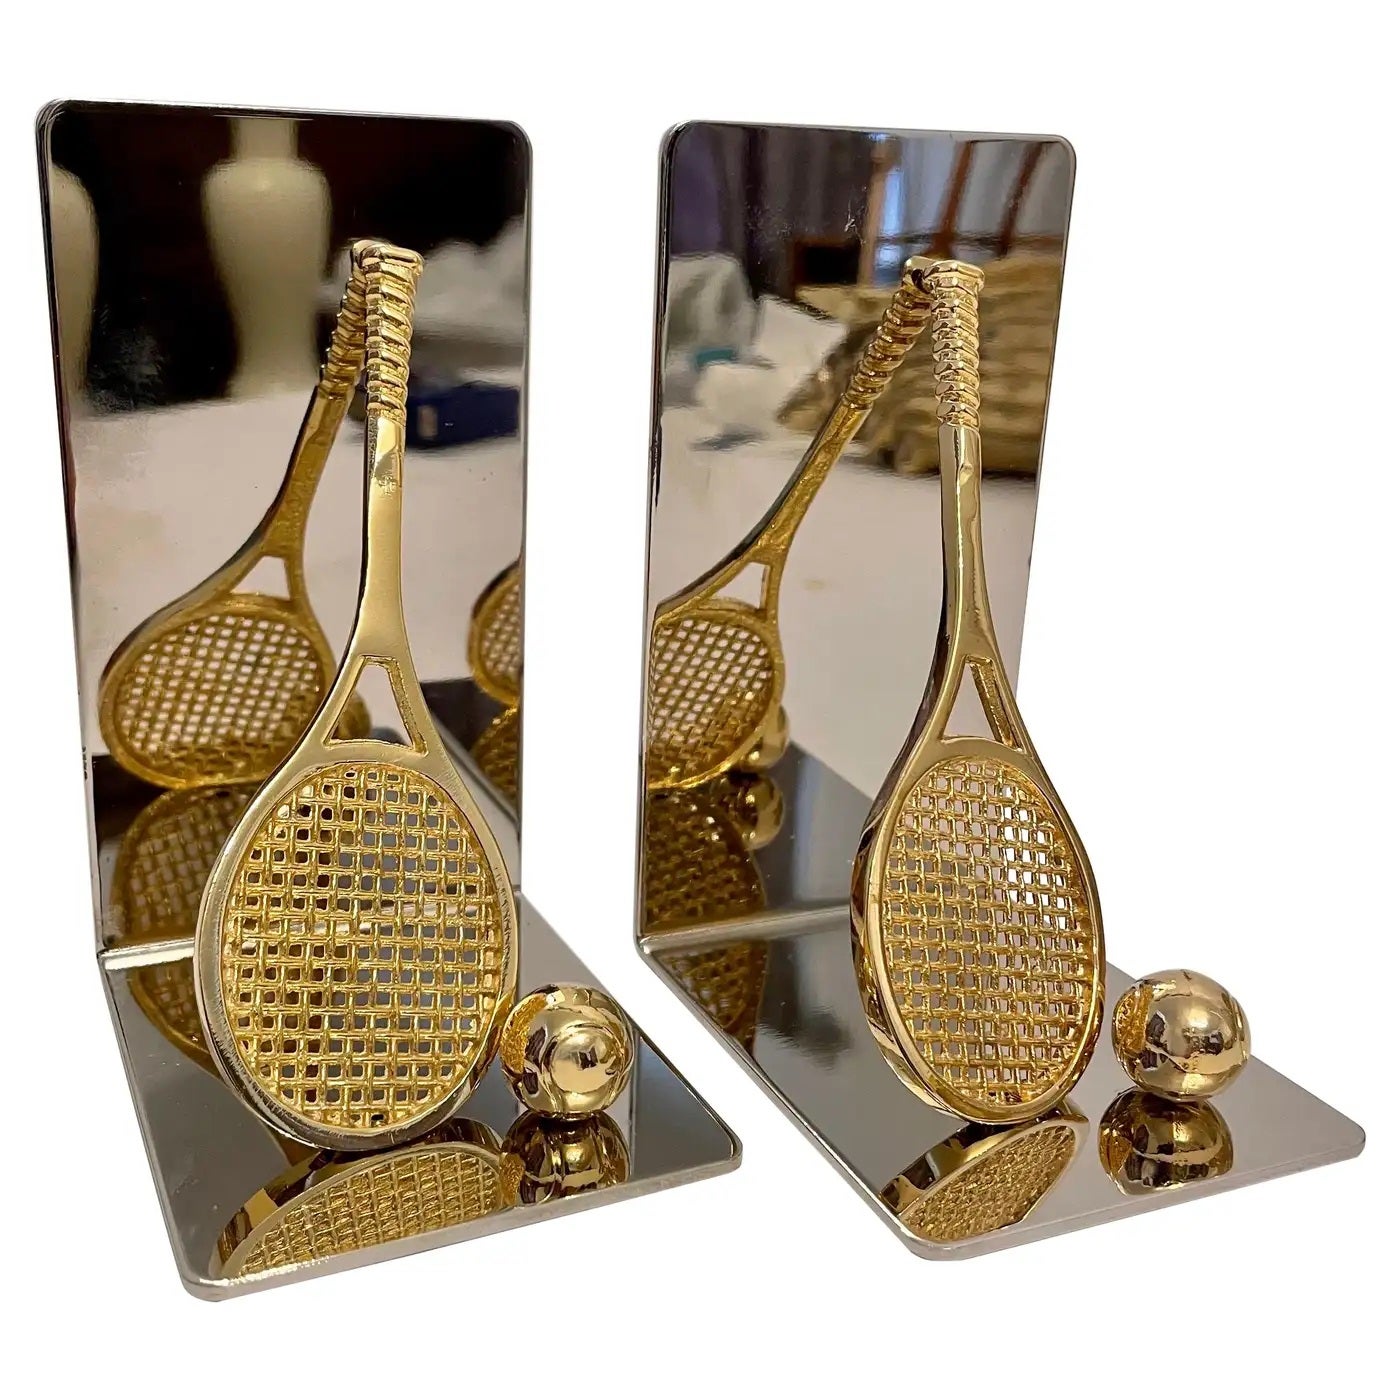 Set of brass and chrome tennis racket bookends. Has thin foam on bottom to prevent scratching furniture. 5.5